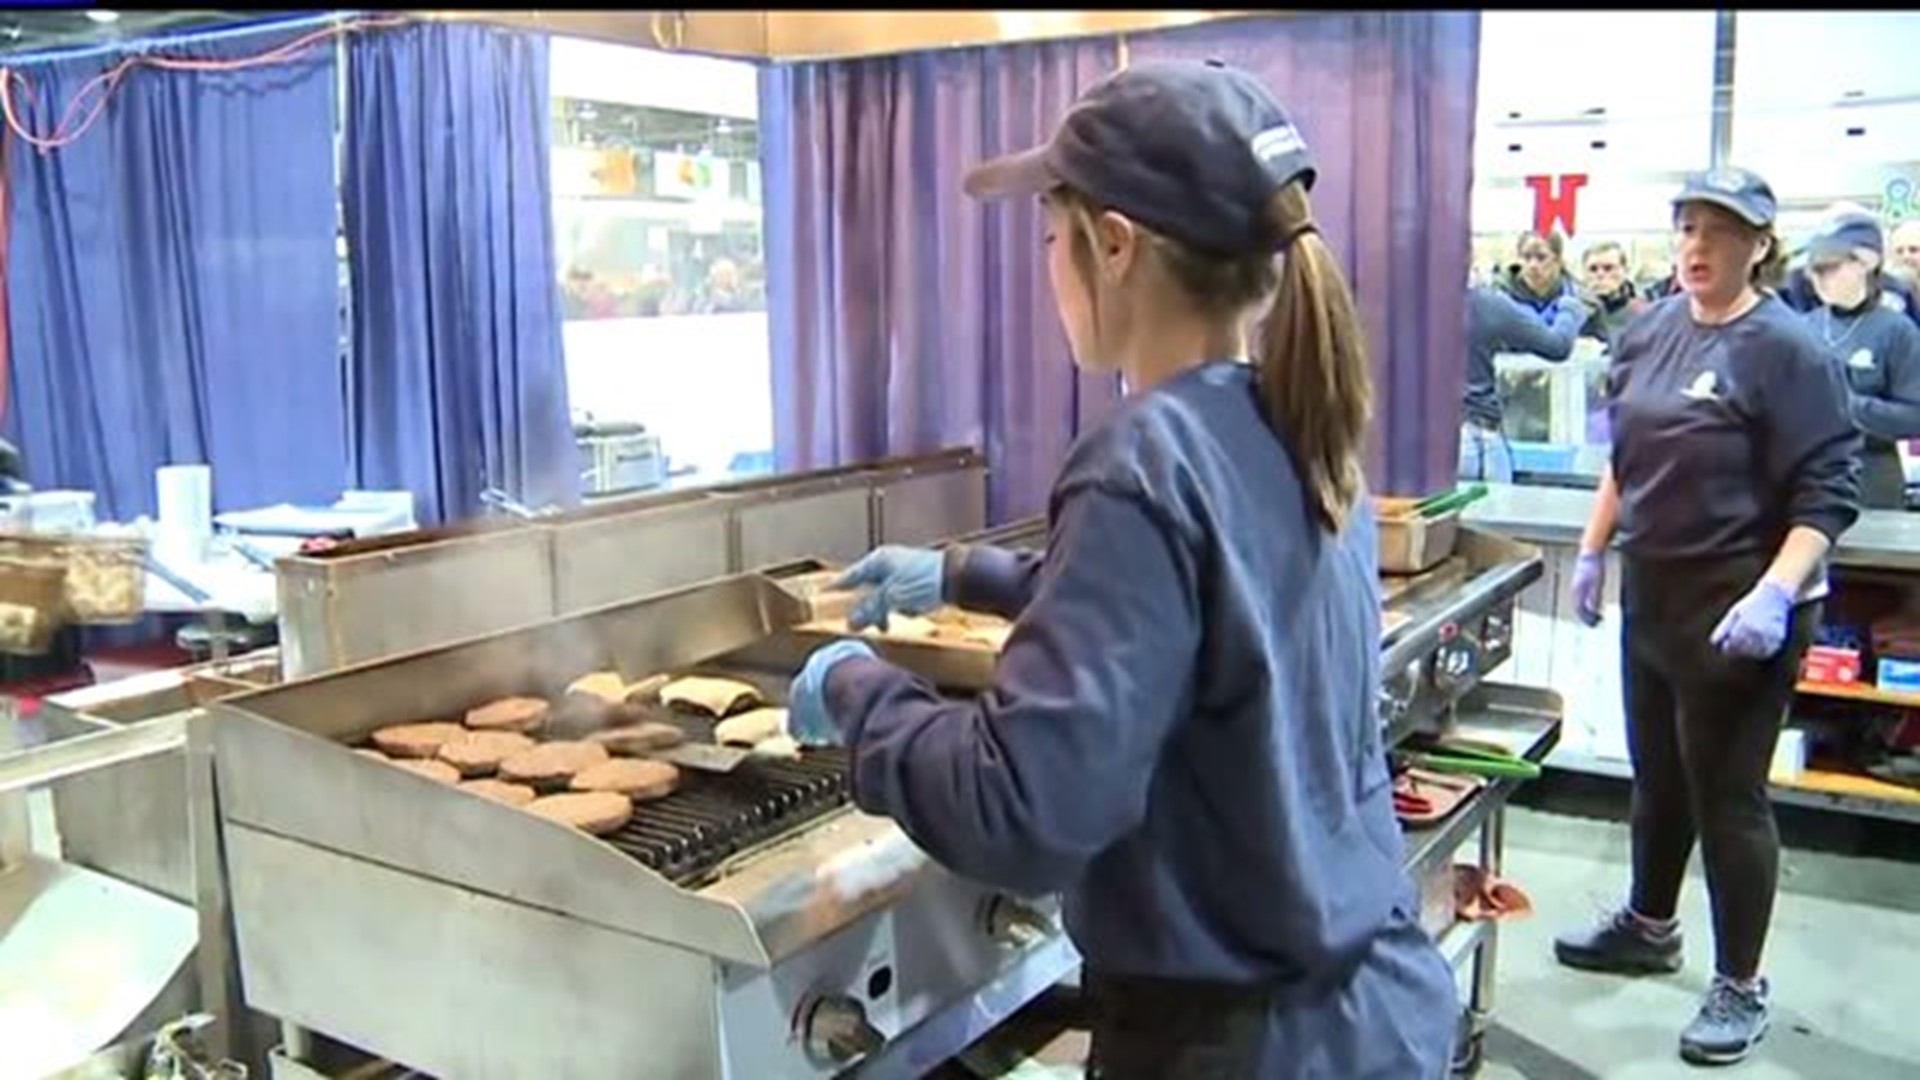 PA Farm Show: Eating at the food court on a $20 budget fox43 com